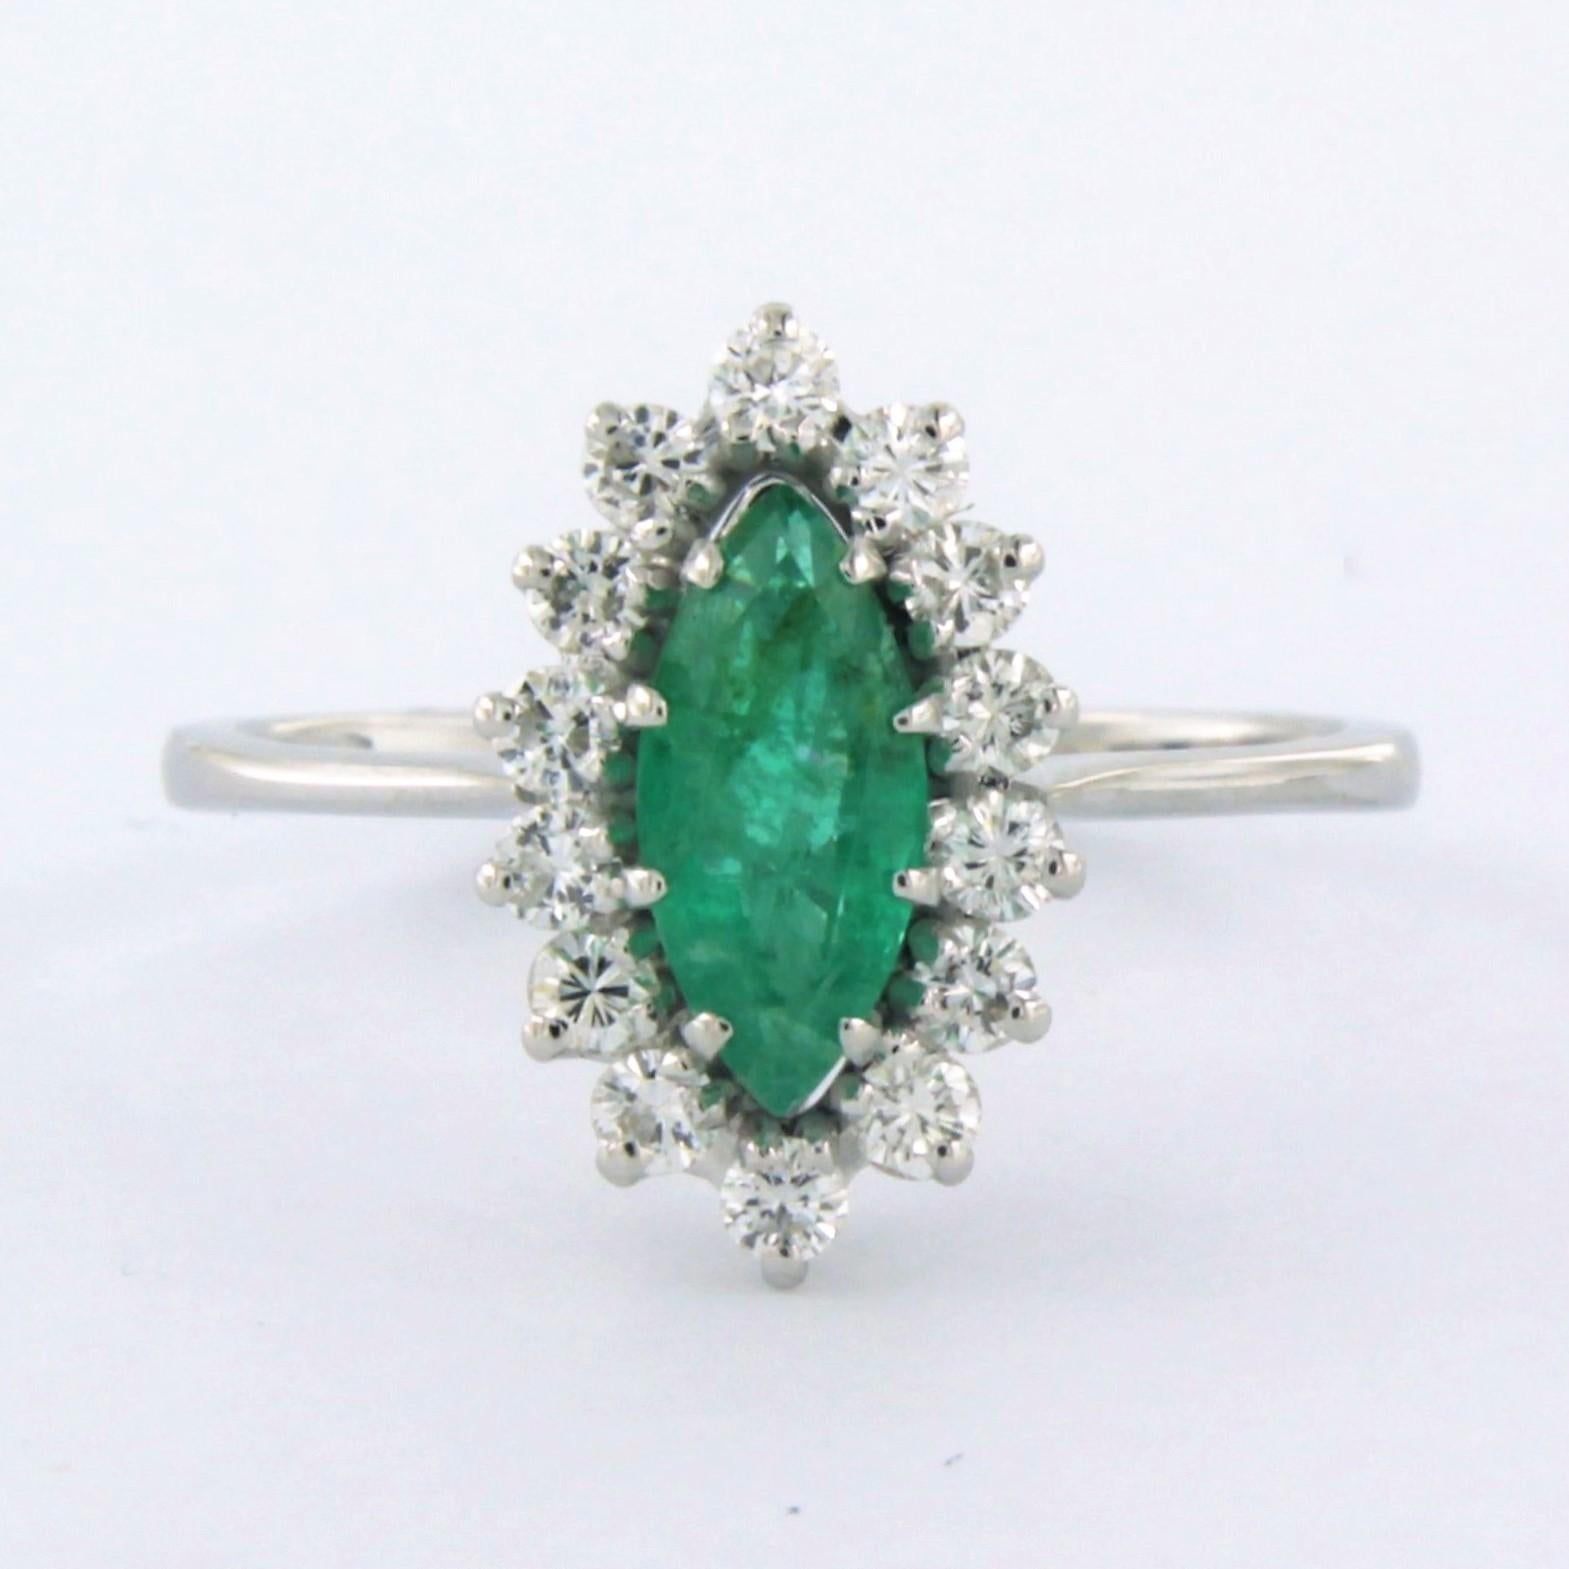 18k white gold cluster ring set with an emerald in the center. 1.00ct and around brilliant cut diamond up to. 0.50ct - F/G - VS/SI - ring size 6.75(17.25/54)

detailed description:

The top of the ring is 1.5 cm wide

ring size U.S. 6.75 - EU.